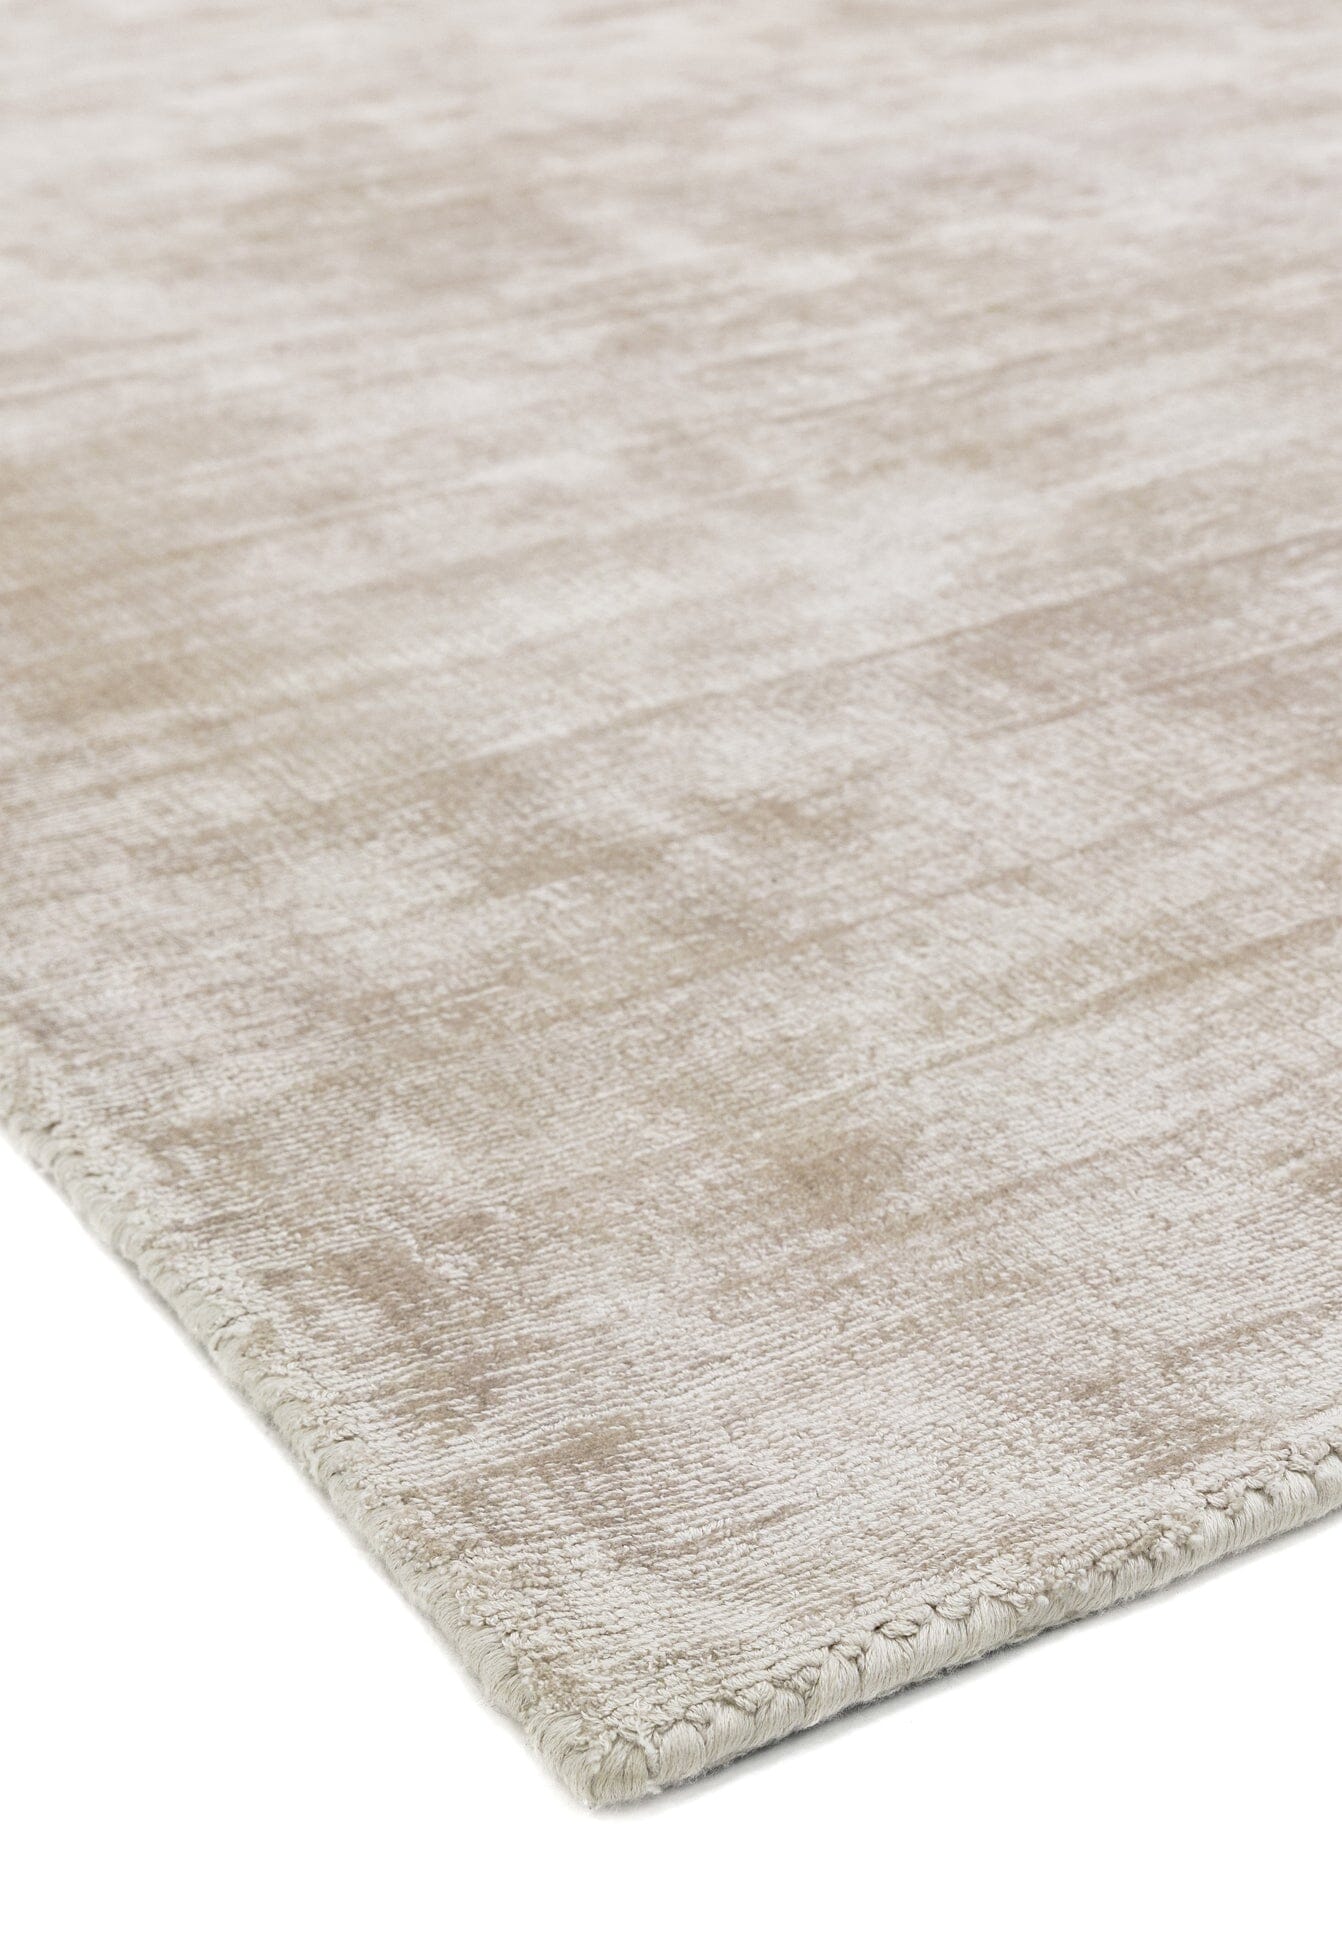  Asiatic Carpets-Asiatic Carpets Blade Hand Woven Rug Putty - 200 x 290cm-Beige, Natural 277 